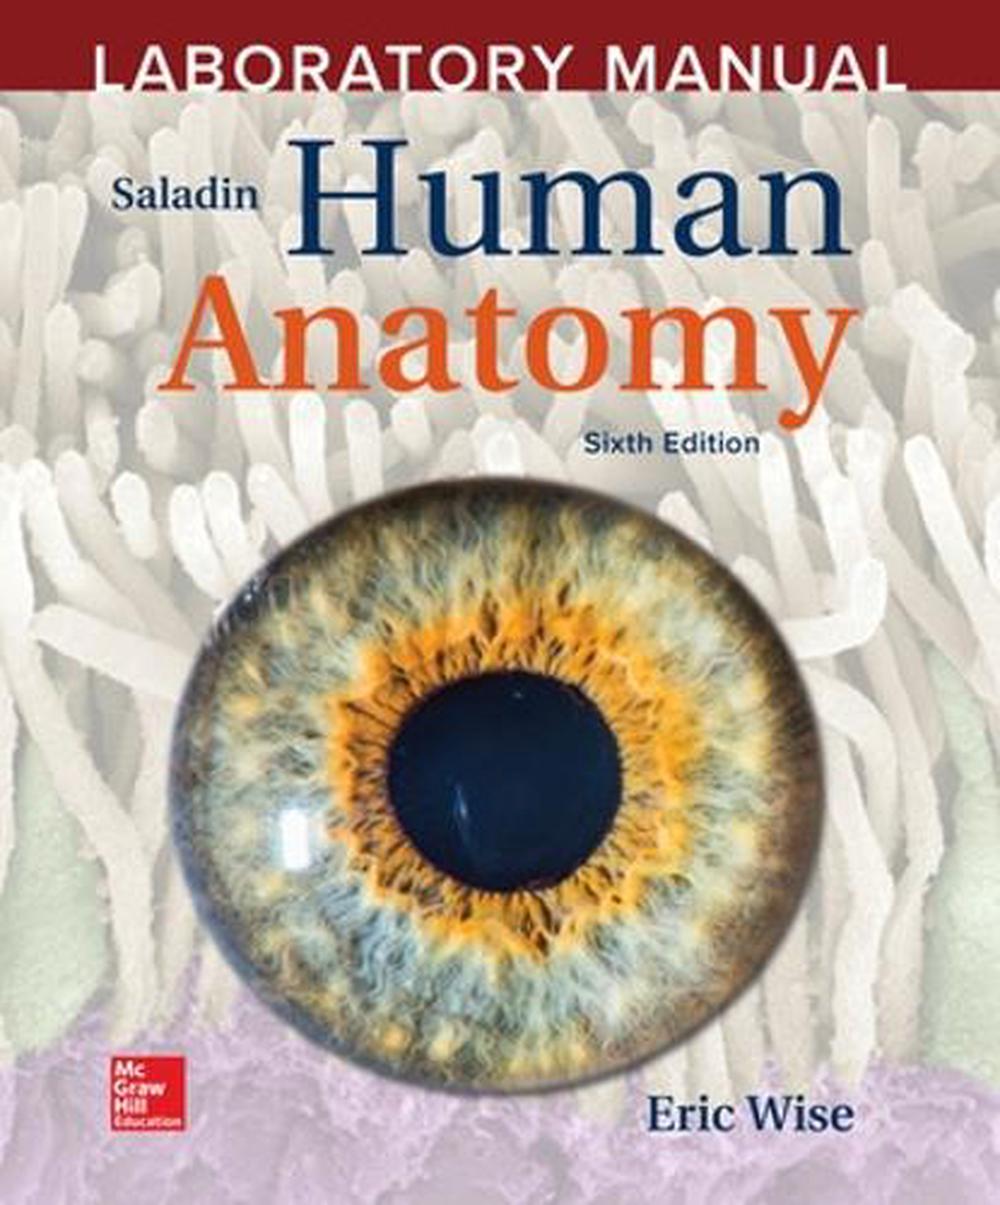 Laboratory Manual by Eric Wise to Saladin Human Anatomy by Eric Wise ( 9781260399769